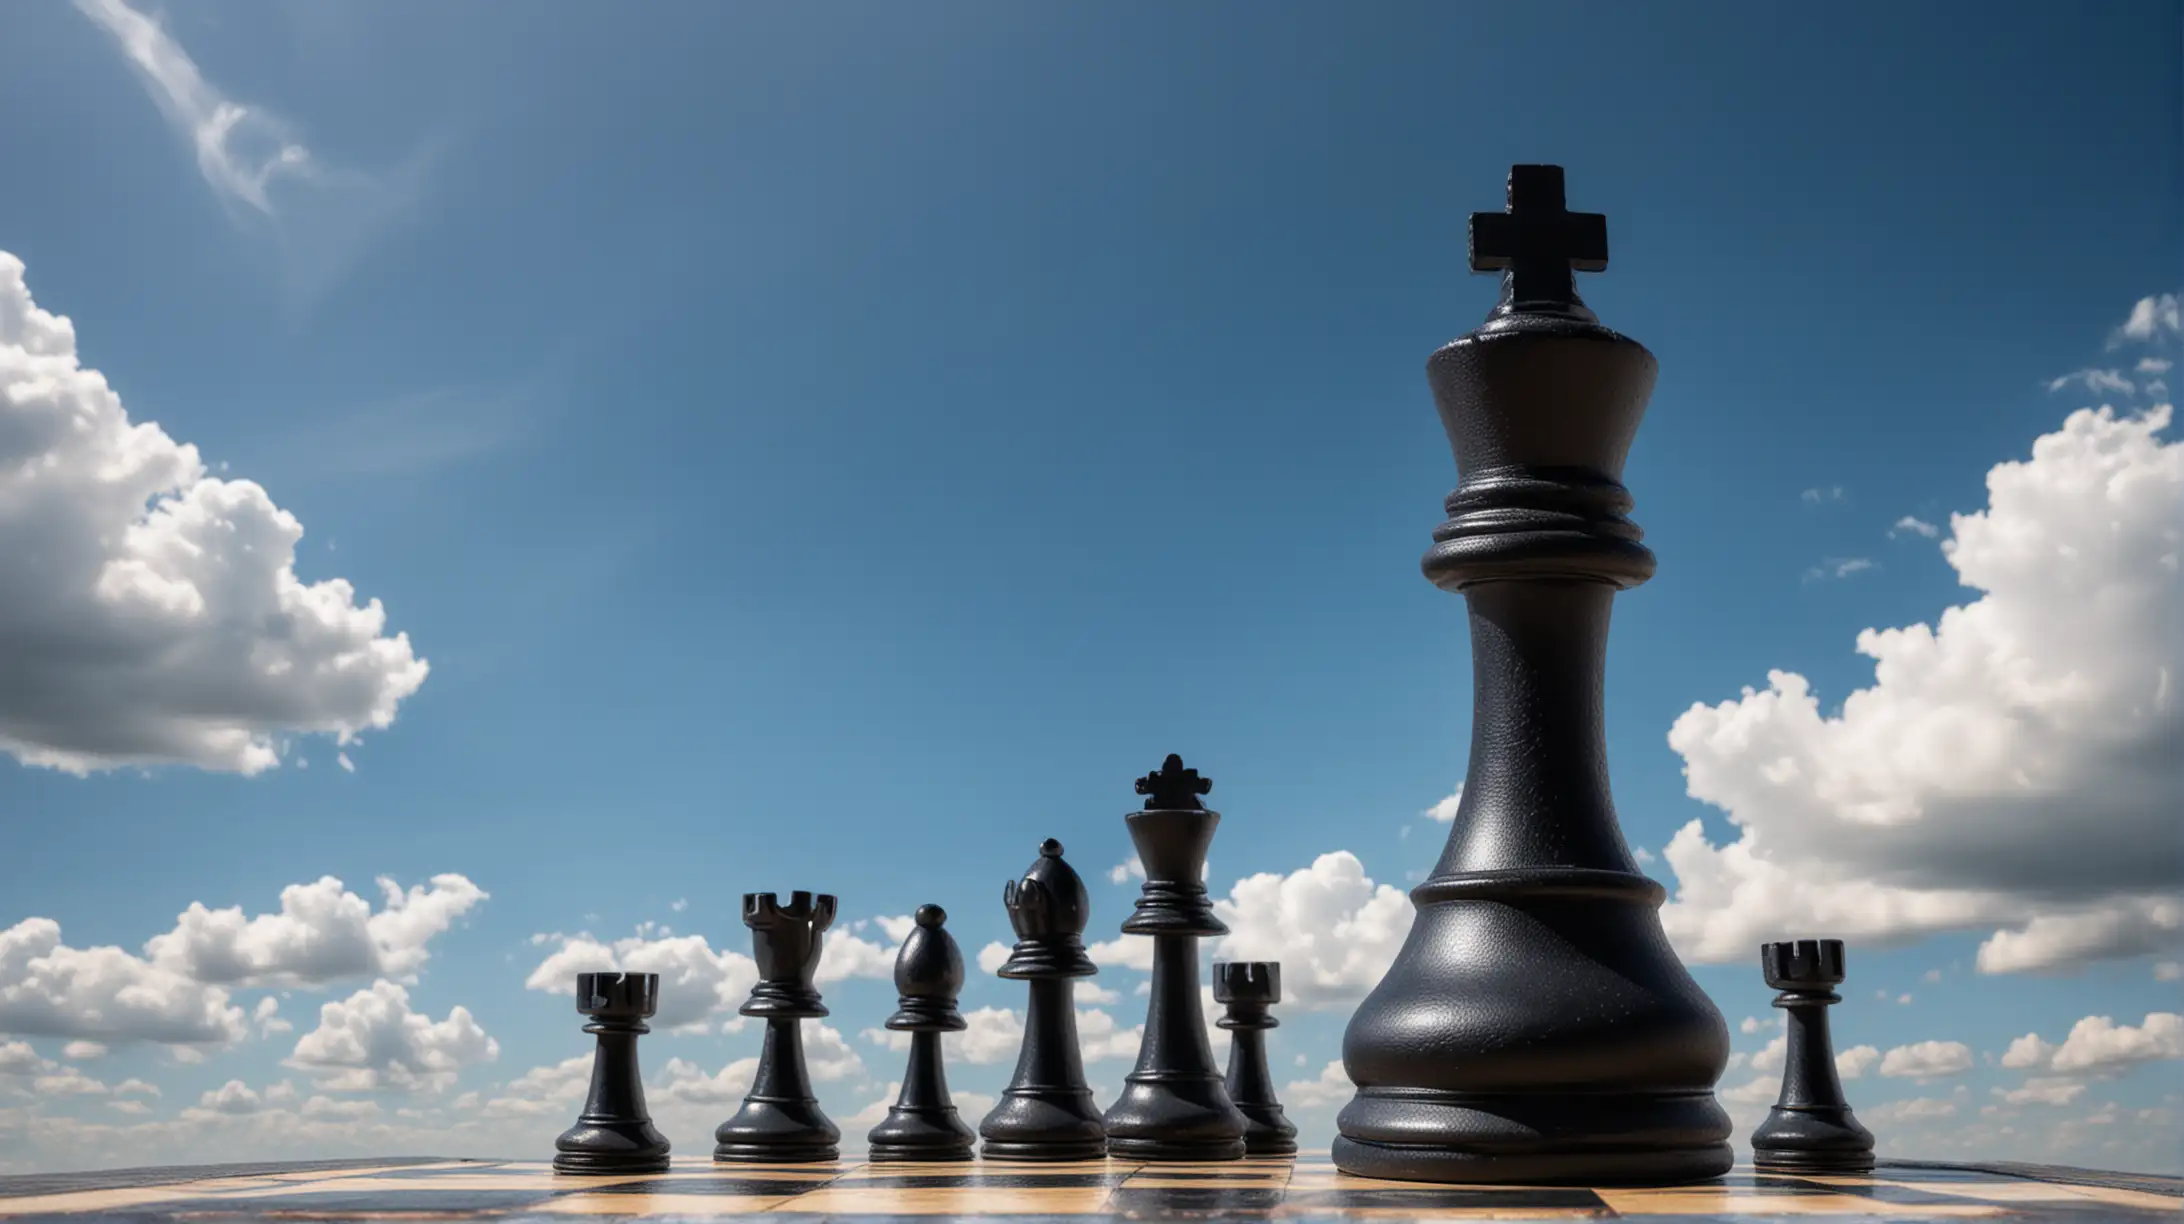 Majestic Black Chess King against a Serene Blue Sky